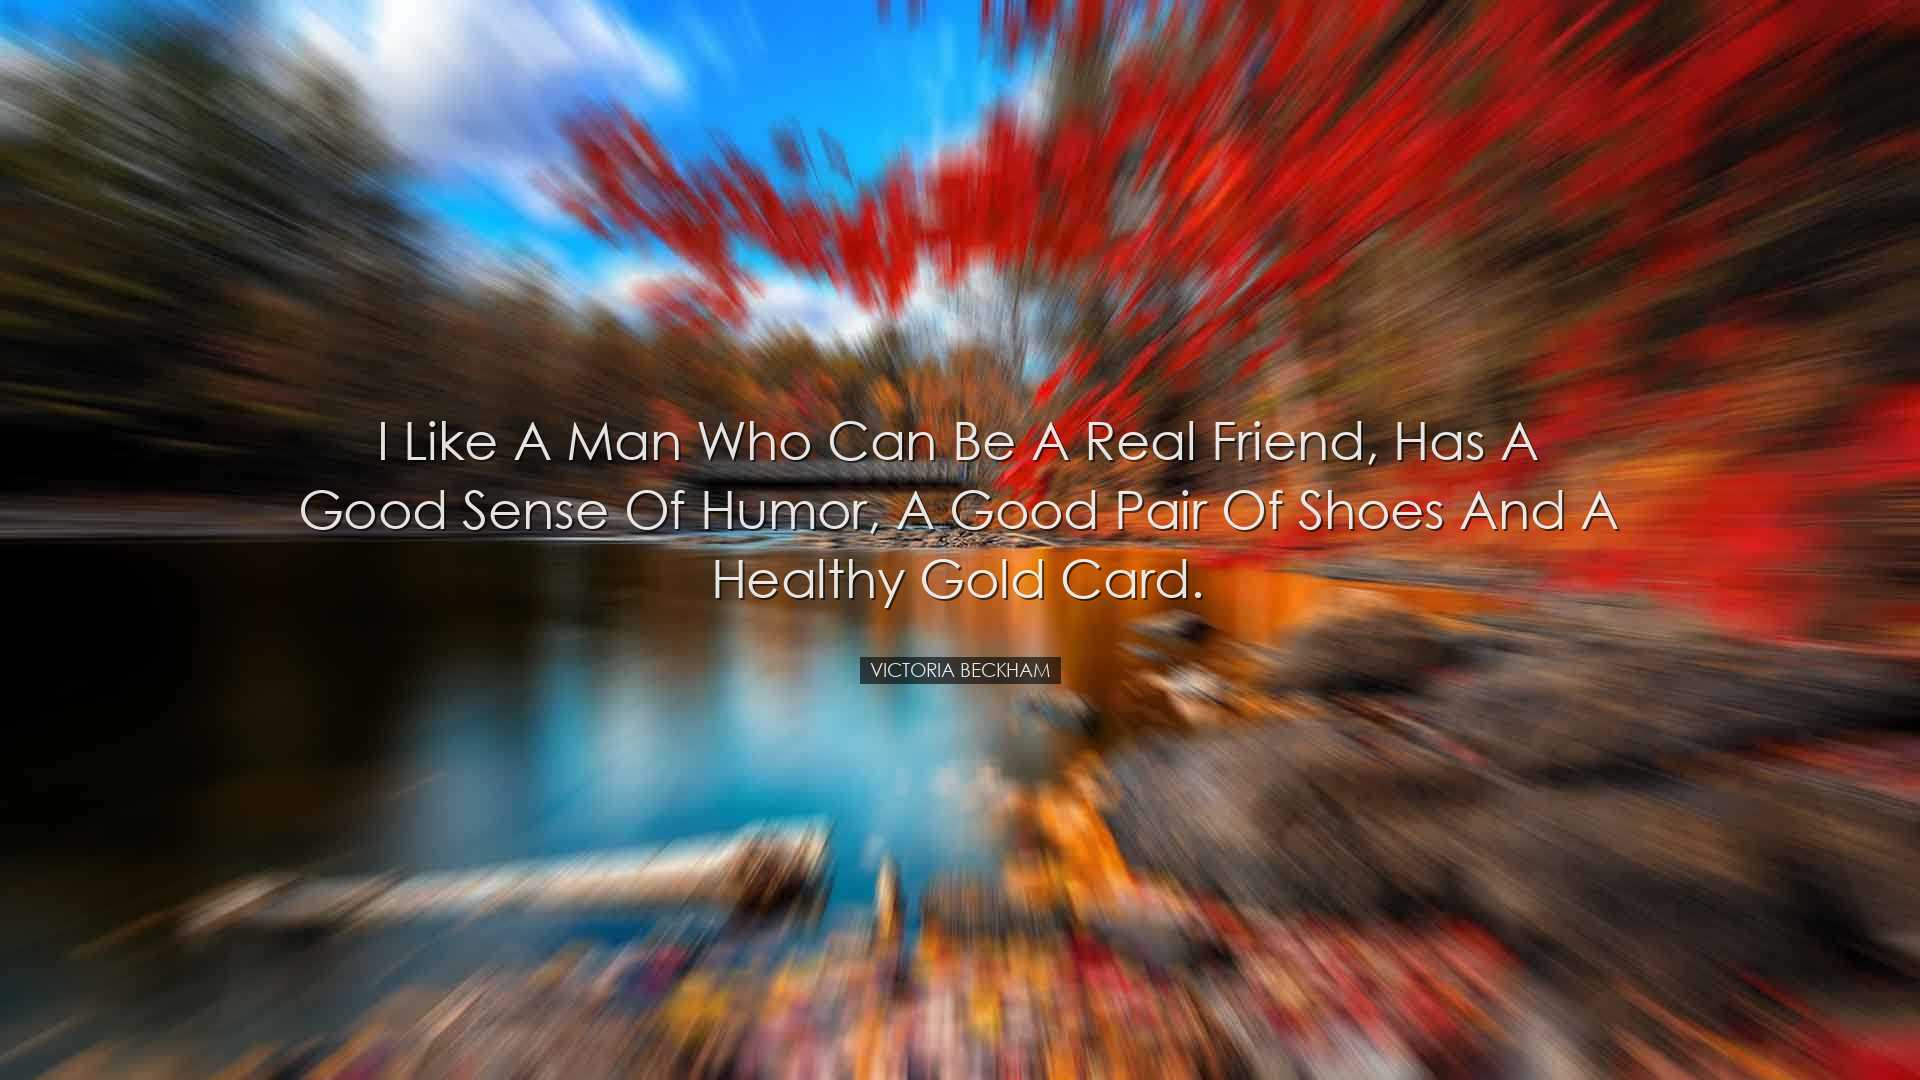 I like a man who can be a real friend, has a good sense of humor,